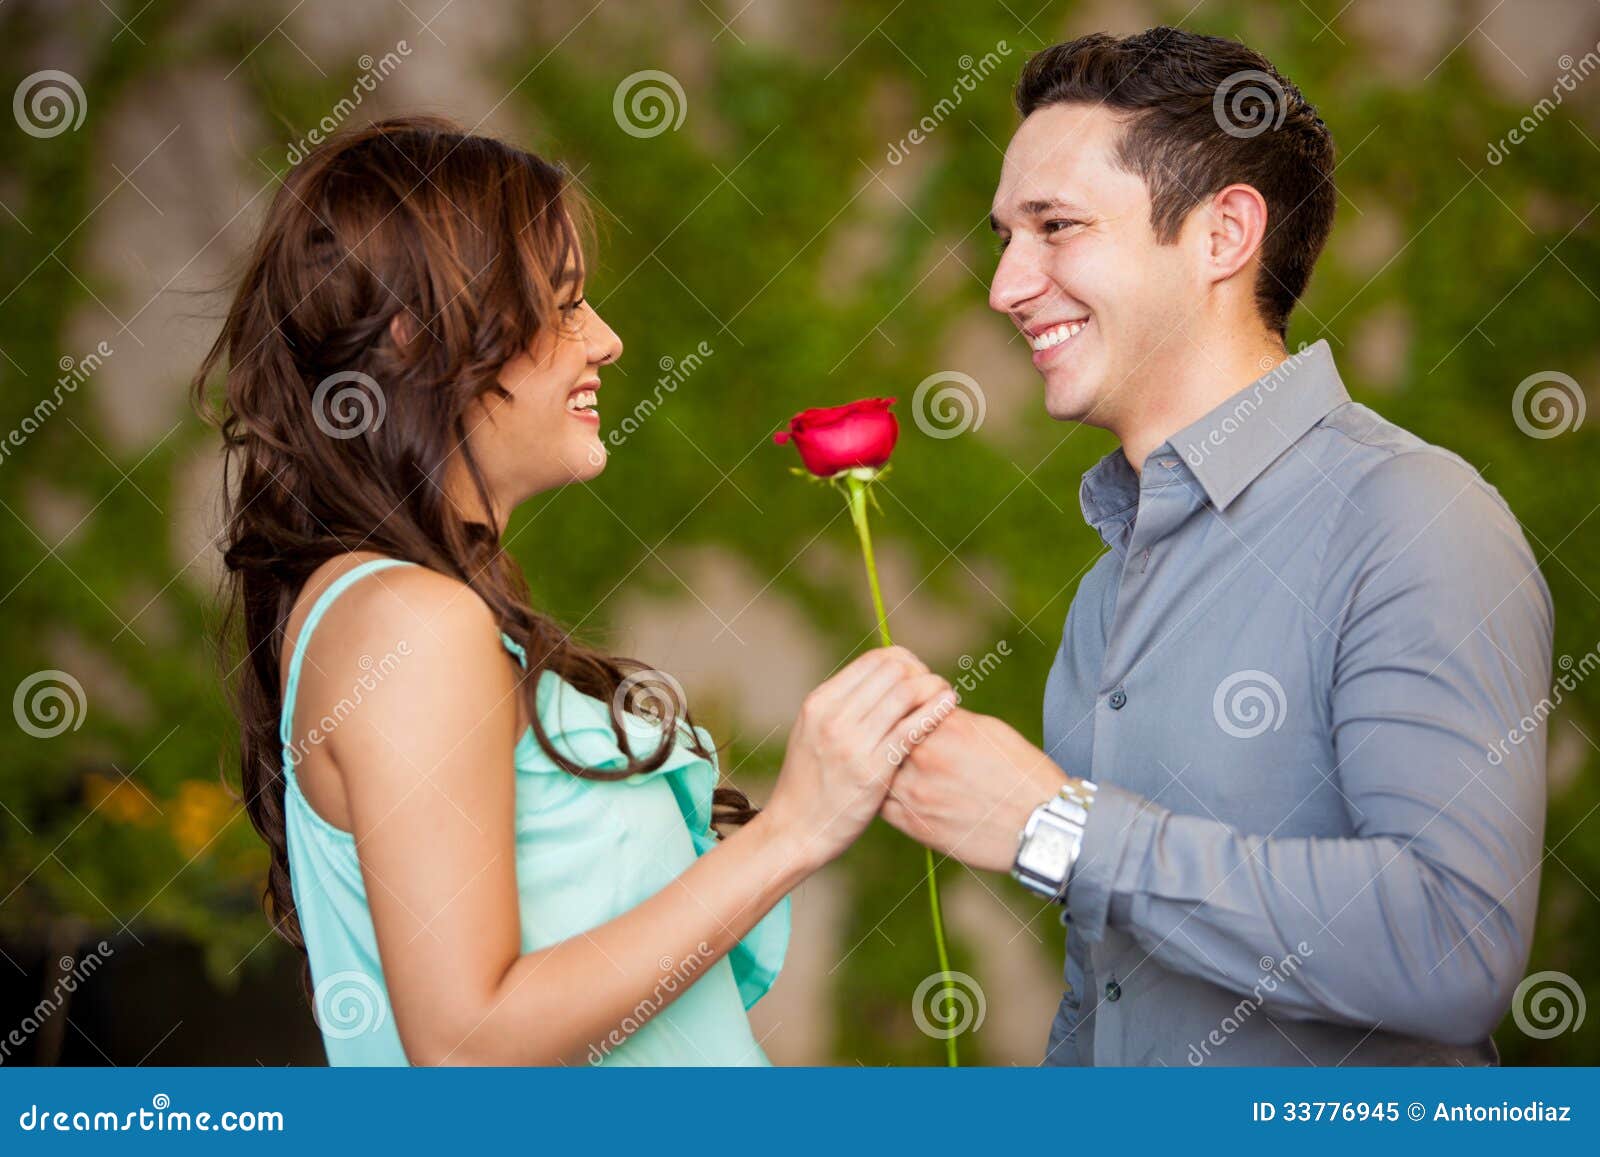 http://thumbs.dreamstime.com/z/happy-latin-couple-love-beautiful-brunette-getting-red-rose-her-date-smiling-33776945.jpg